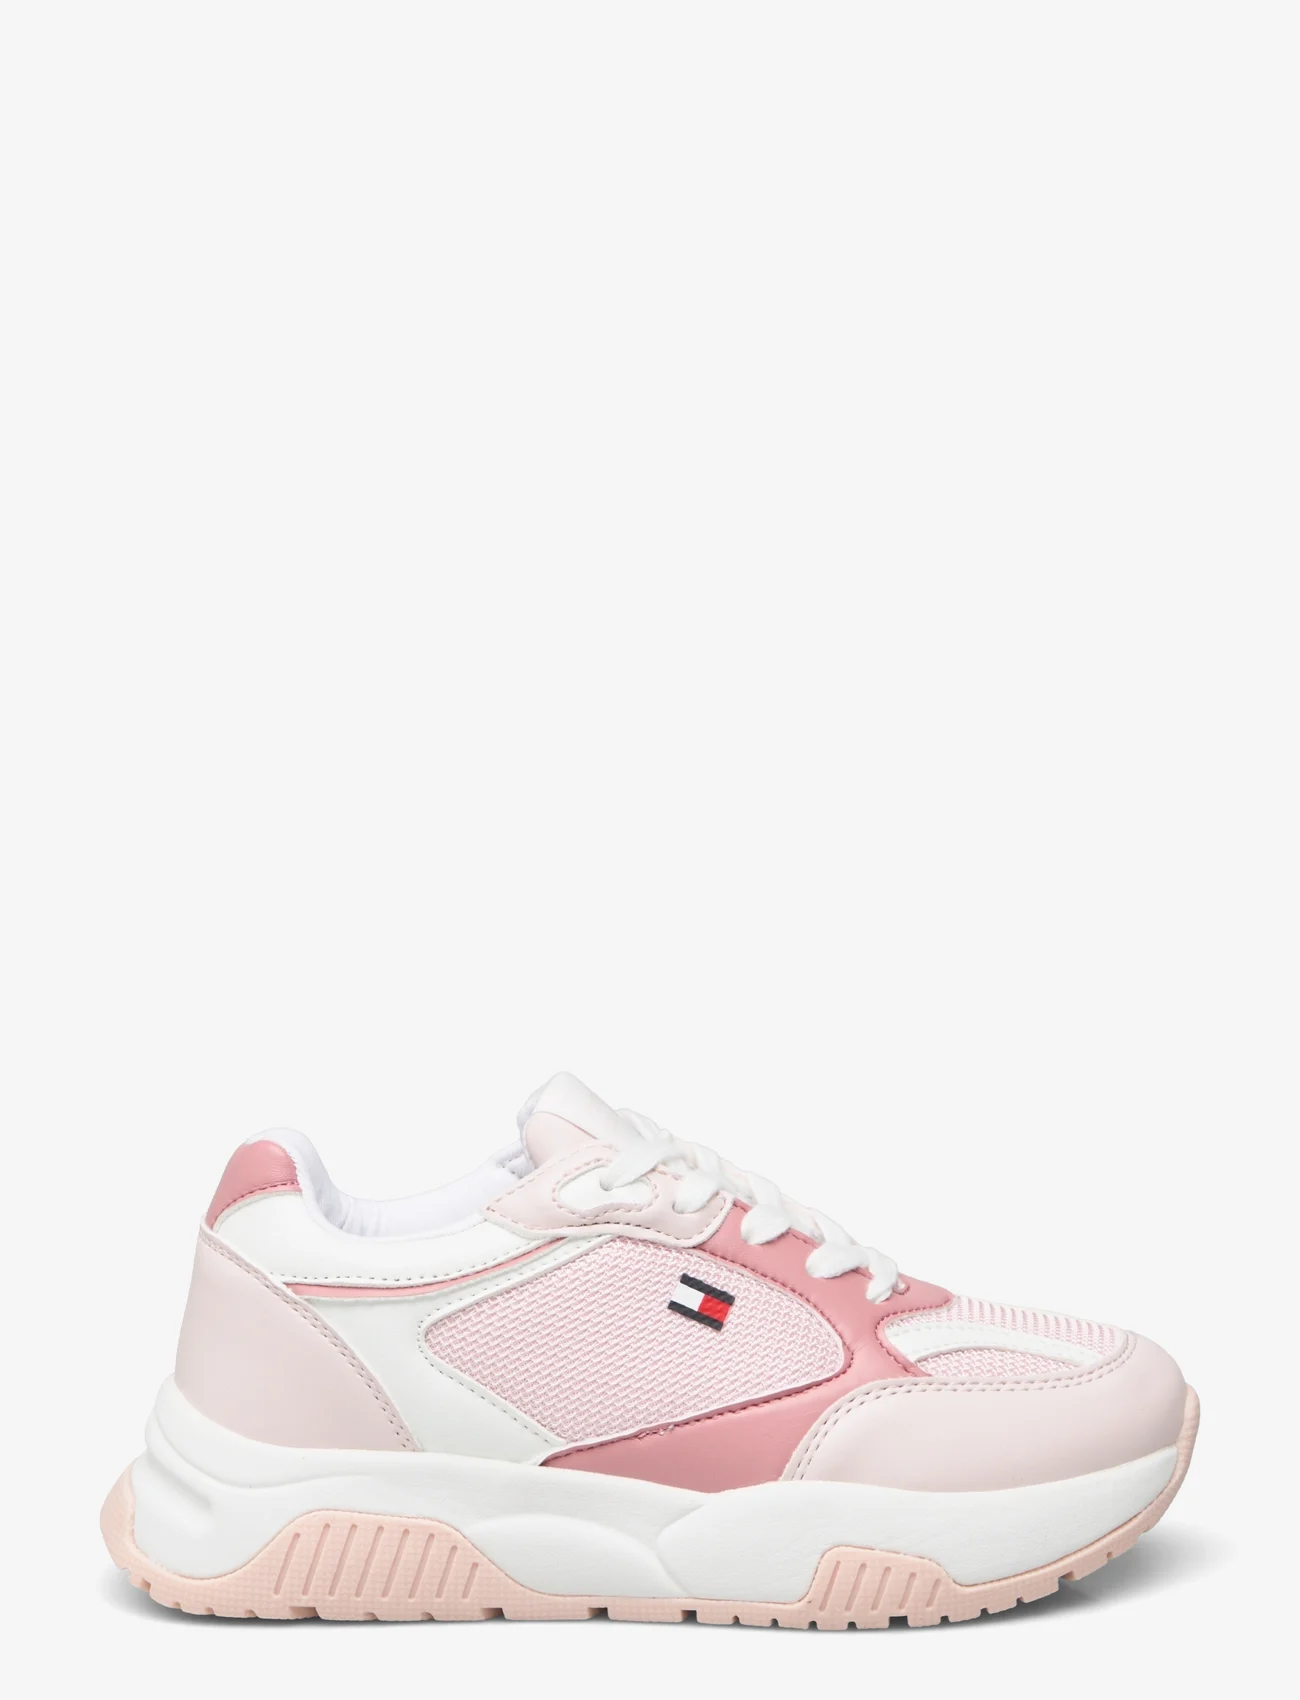 Tommy Hilfiger - LOW CUT LACE-UP SNEAKER - sommerschnäppchen - pink/white - 1